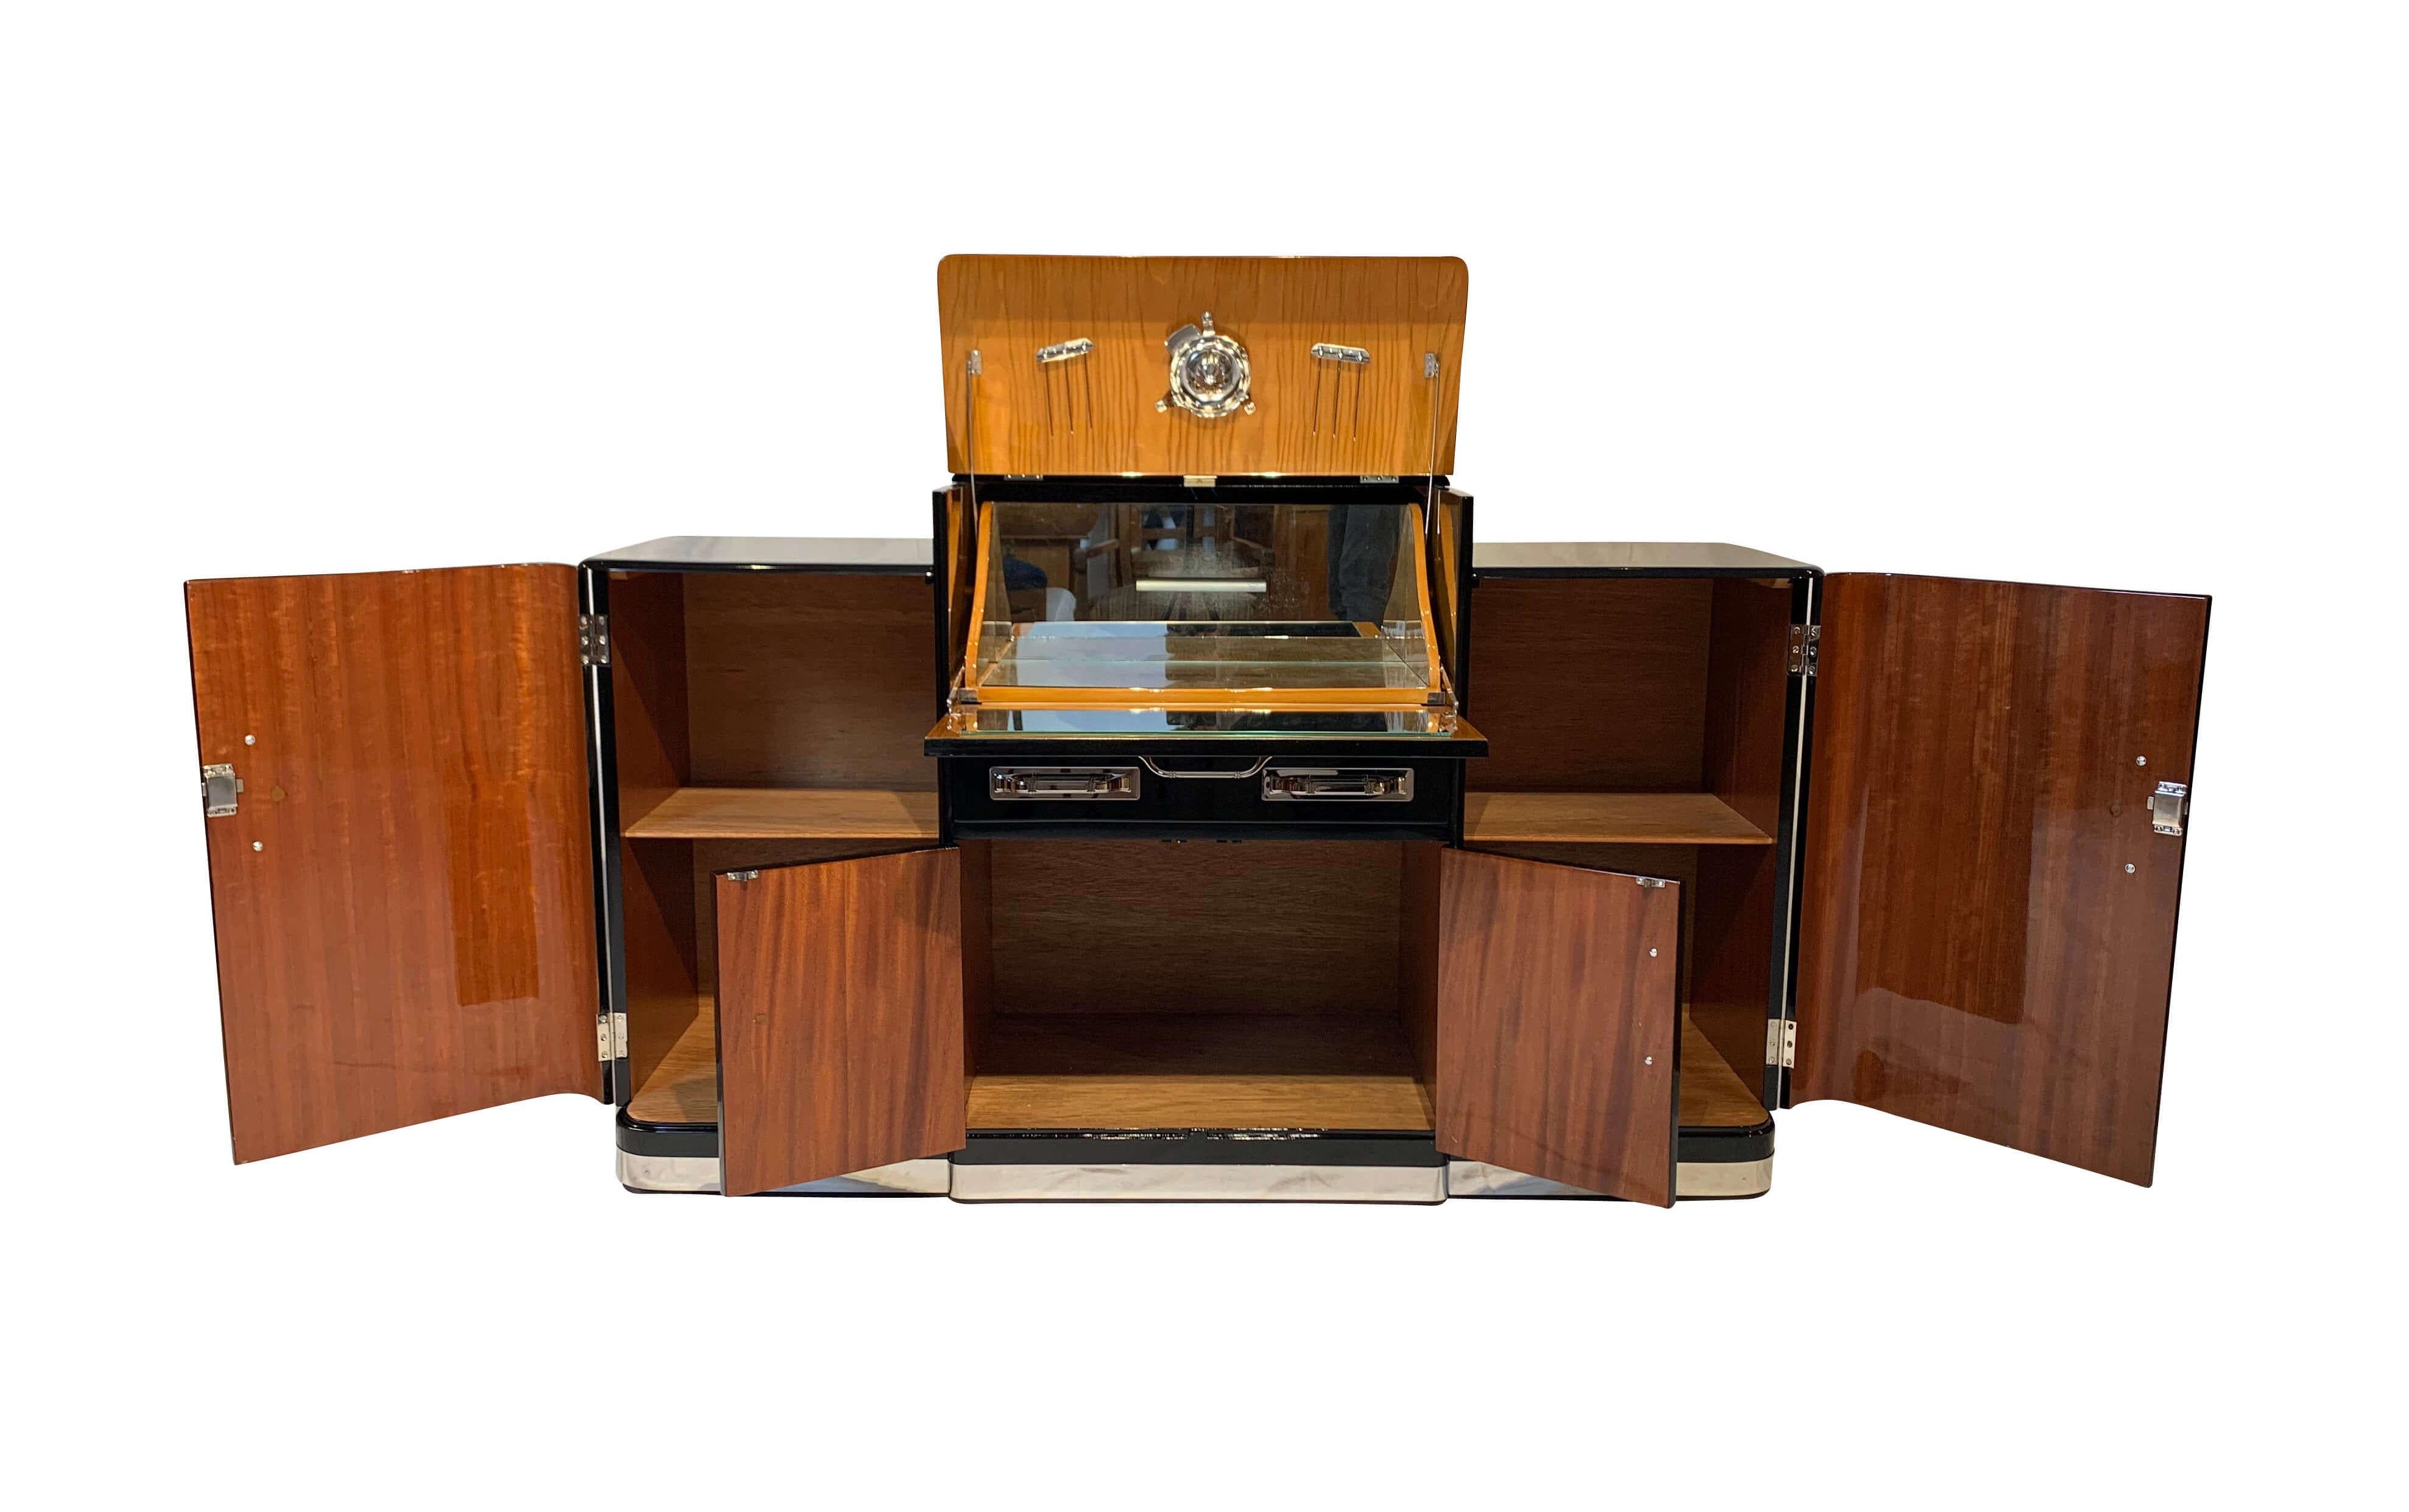 Metal Art Deco Sideboard with Fold-Up Bar, Black Piano Lacquer, England, circa 1930s